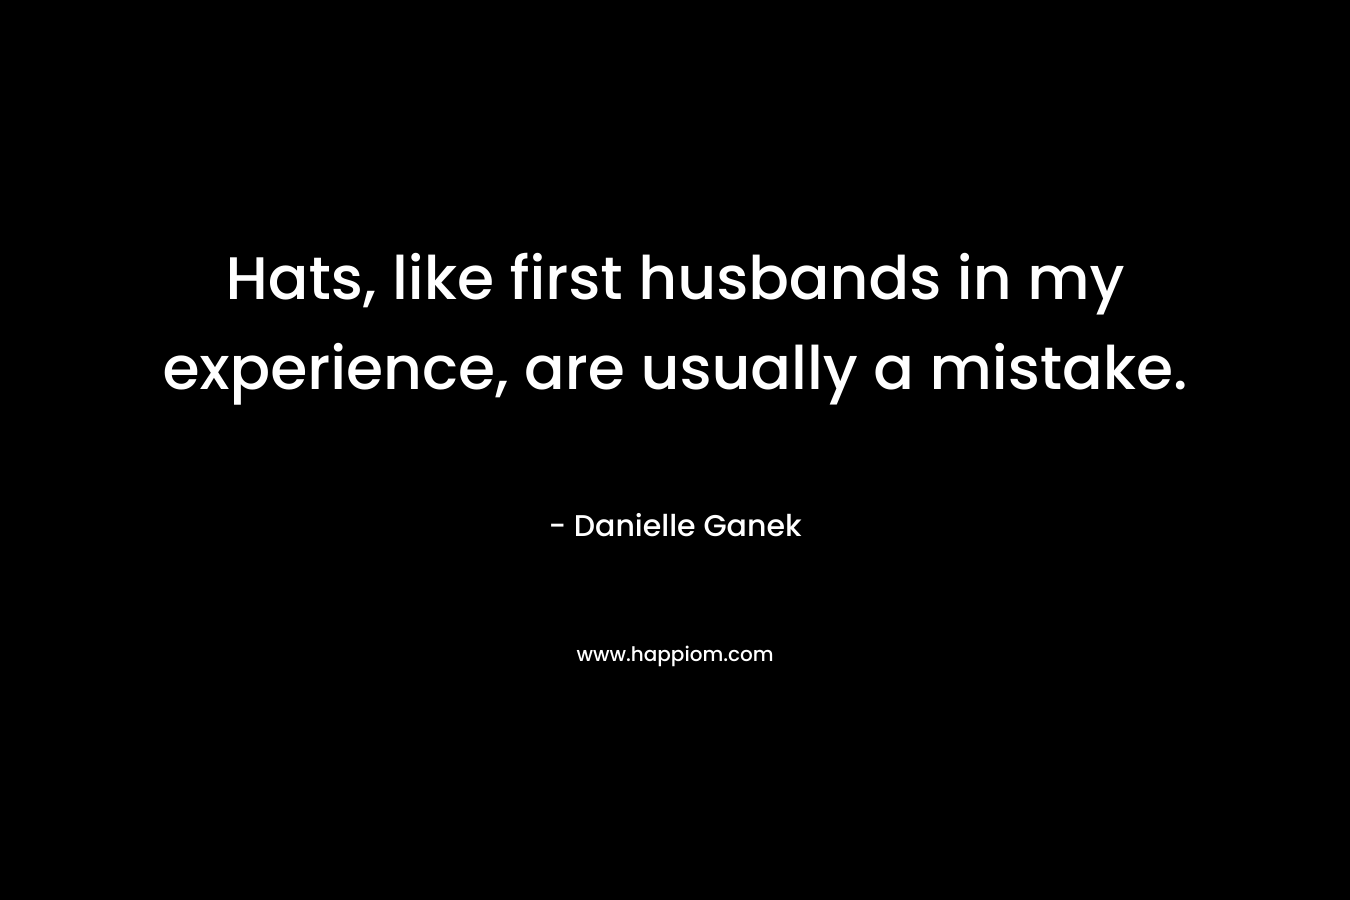 Hats, like first husbands in my experience, are usually a mistake. – Danielle Ganek